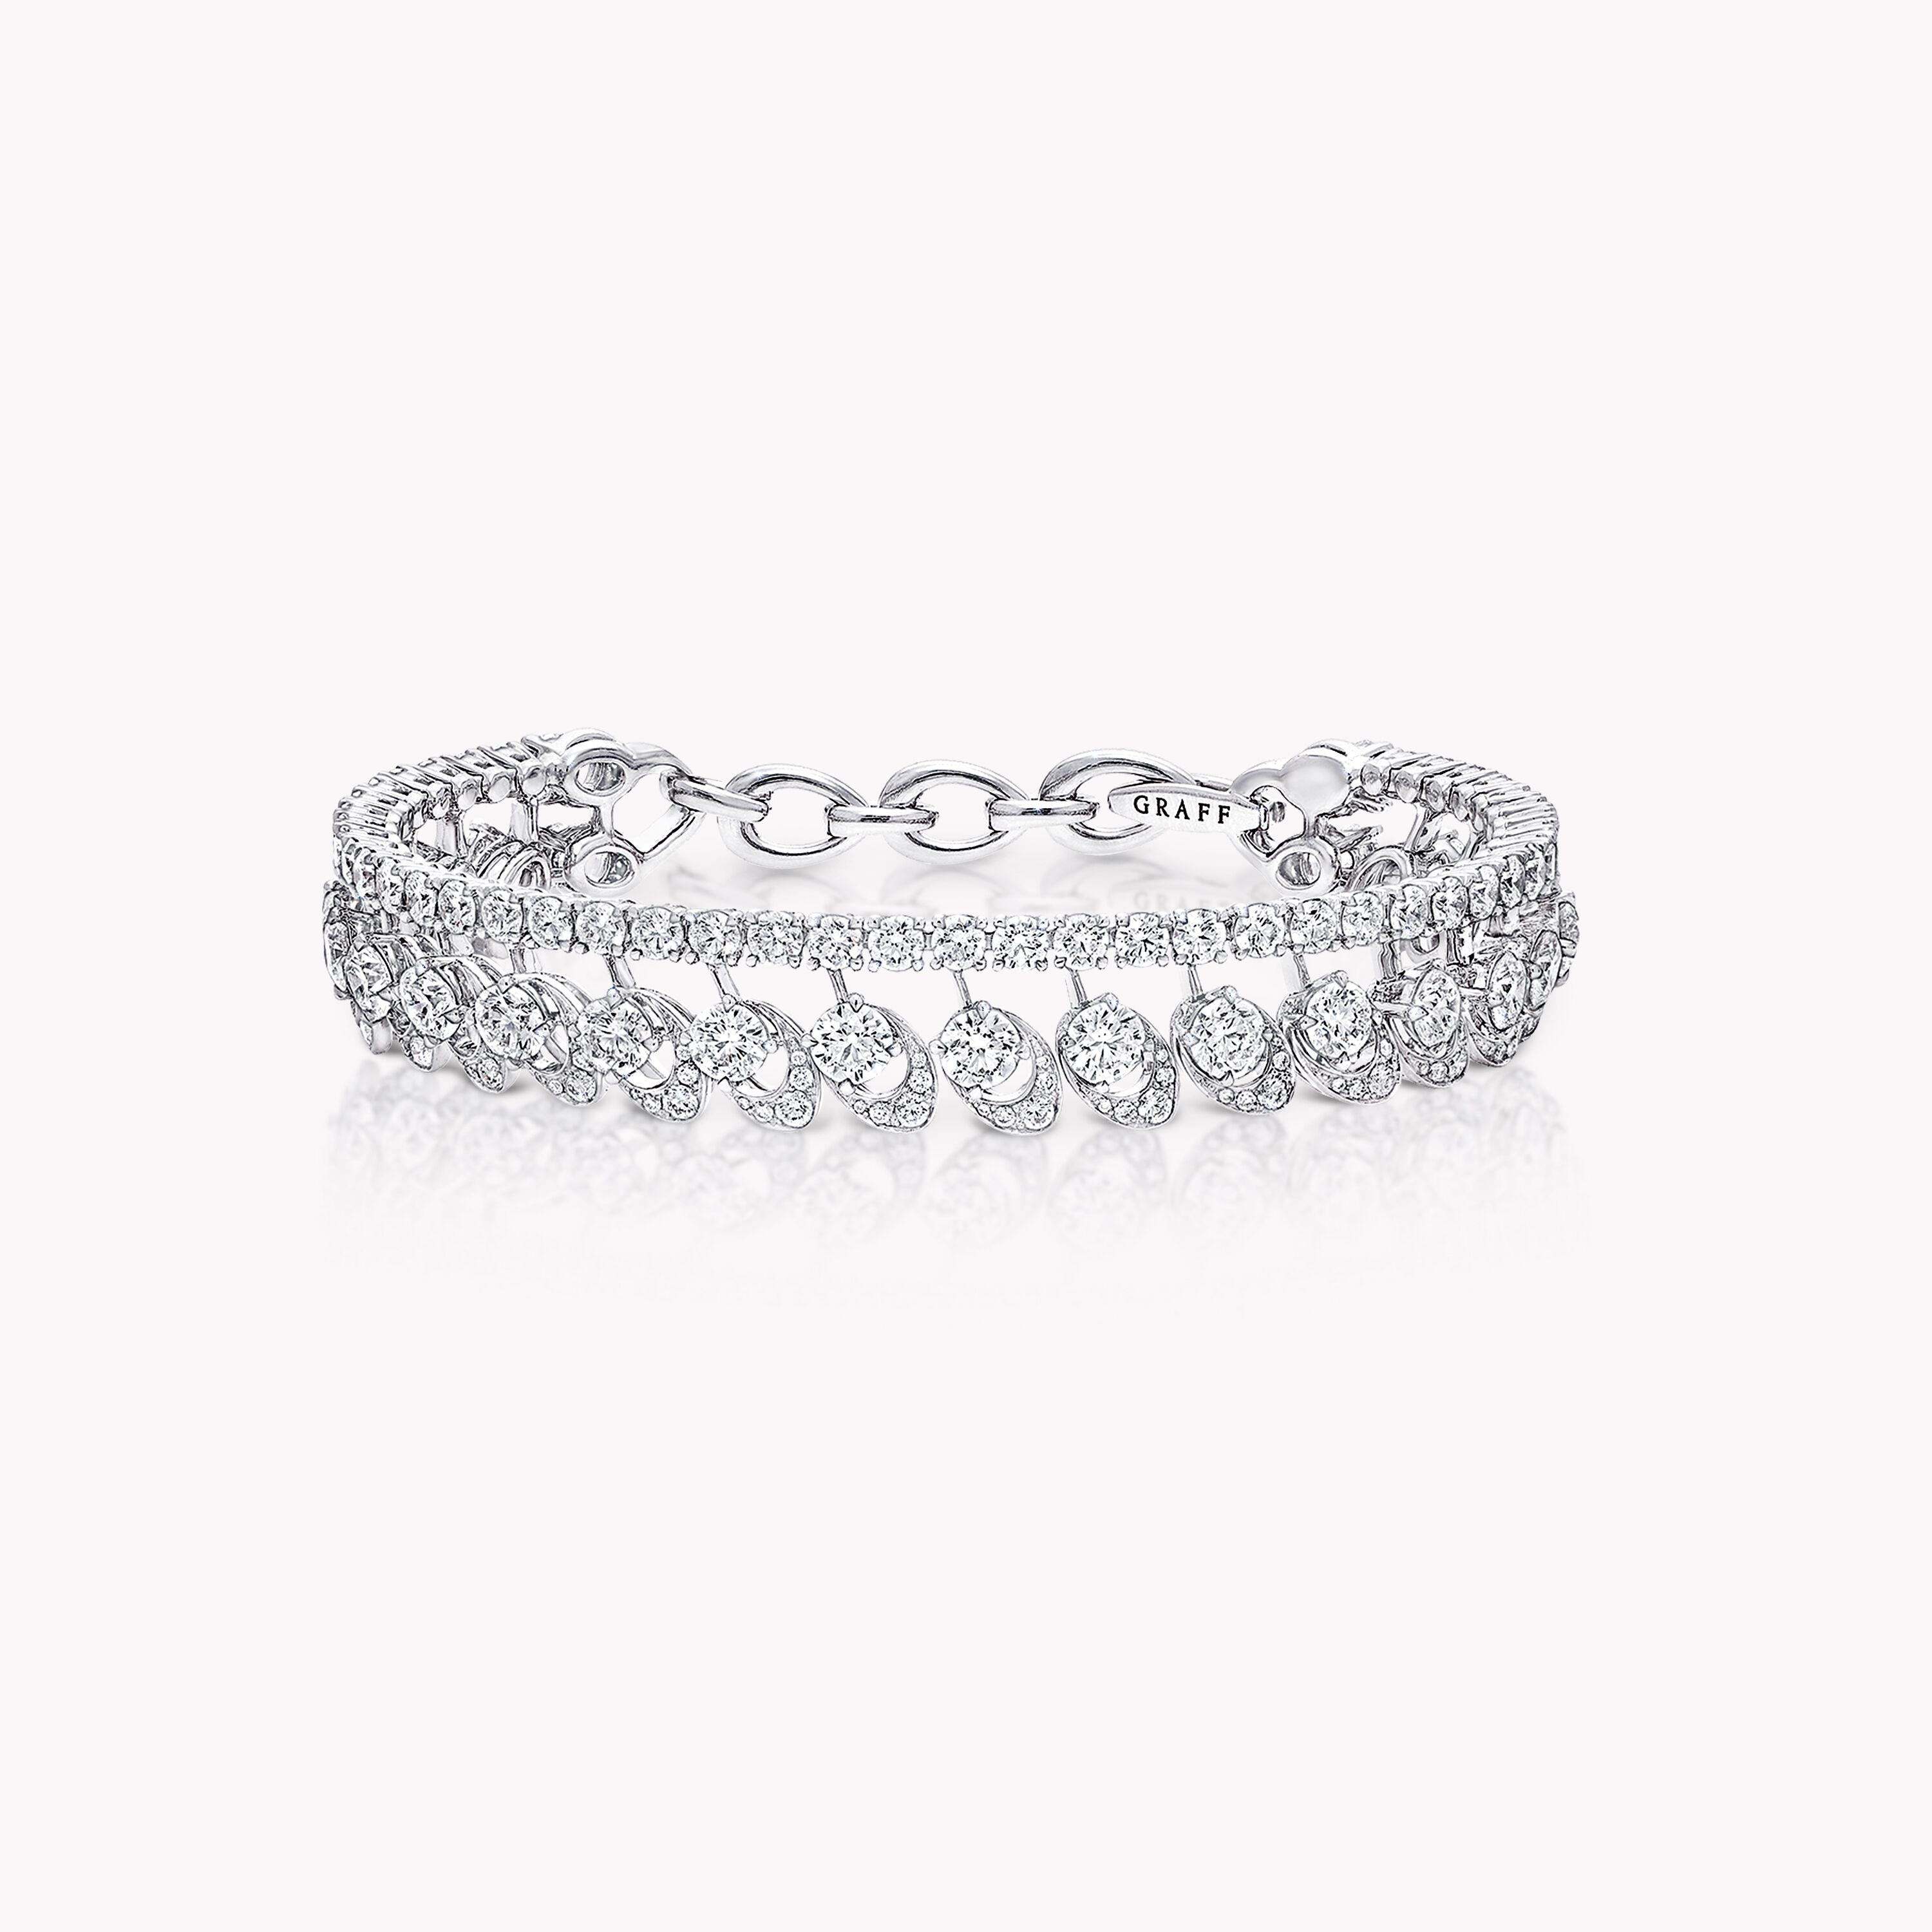 Showcase or Stack Two Ways to Style Your Tennis Bracelet